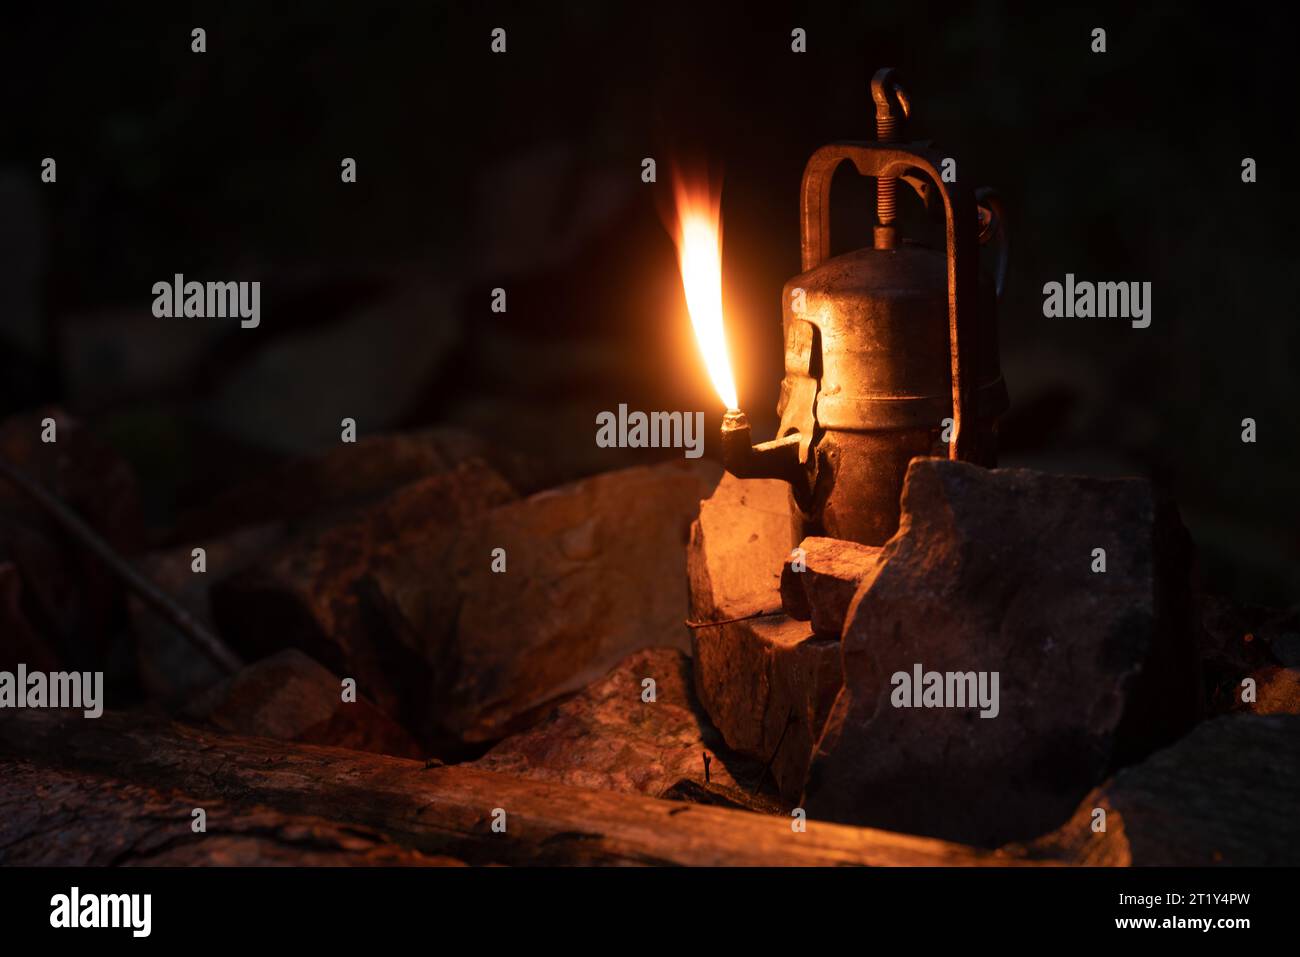 Burning old miner's carbide lamp with high flame, standing among small quartzite stones. Dark night, natural scene, shallow focus. Stock Photo